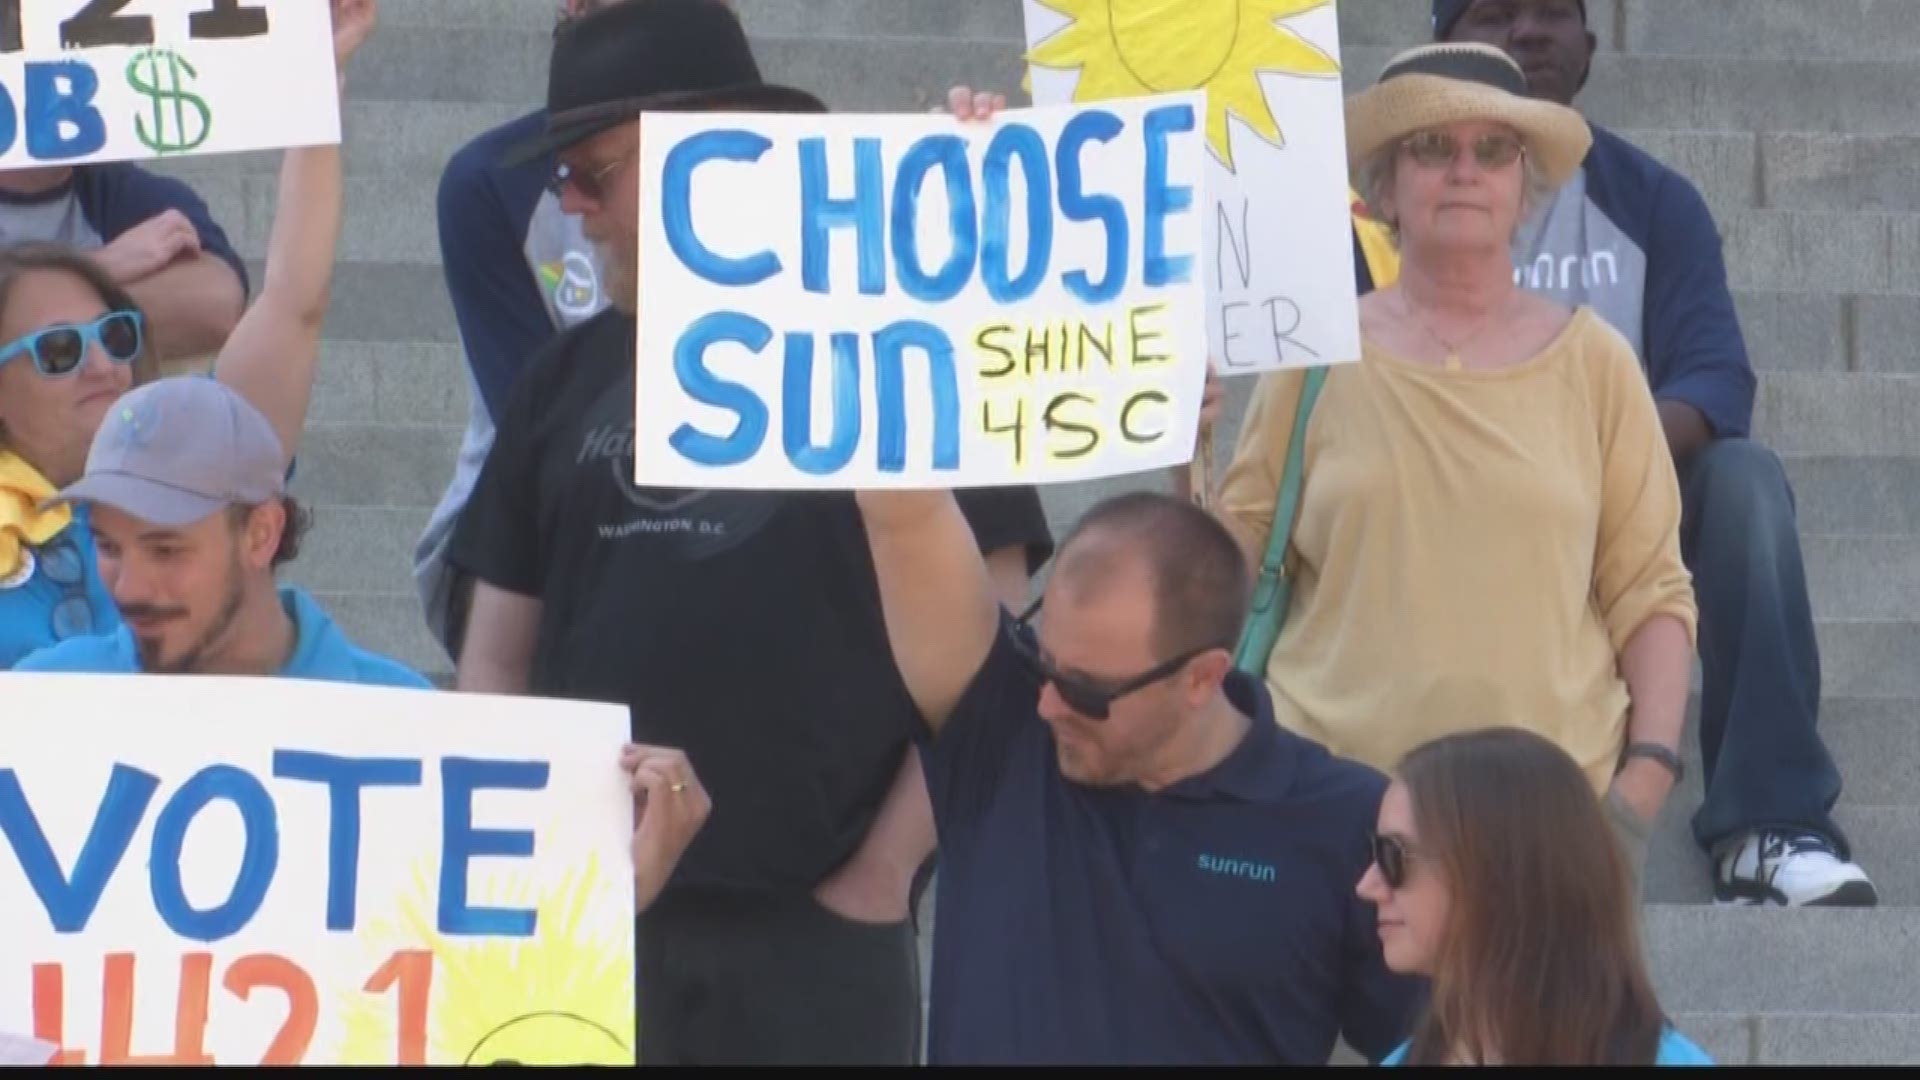 The group says they want to see solar energy in South Carolina expand.